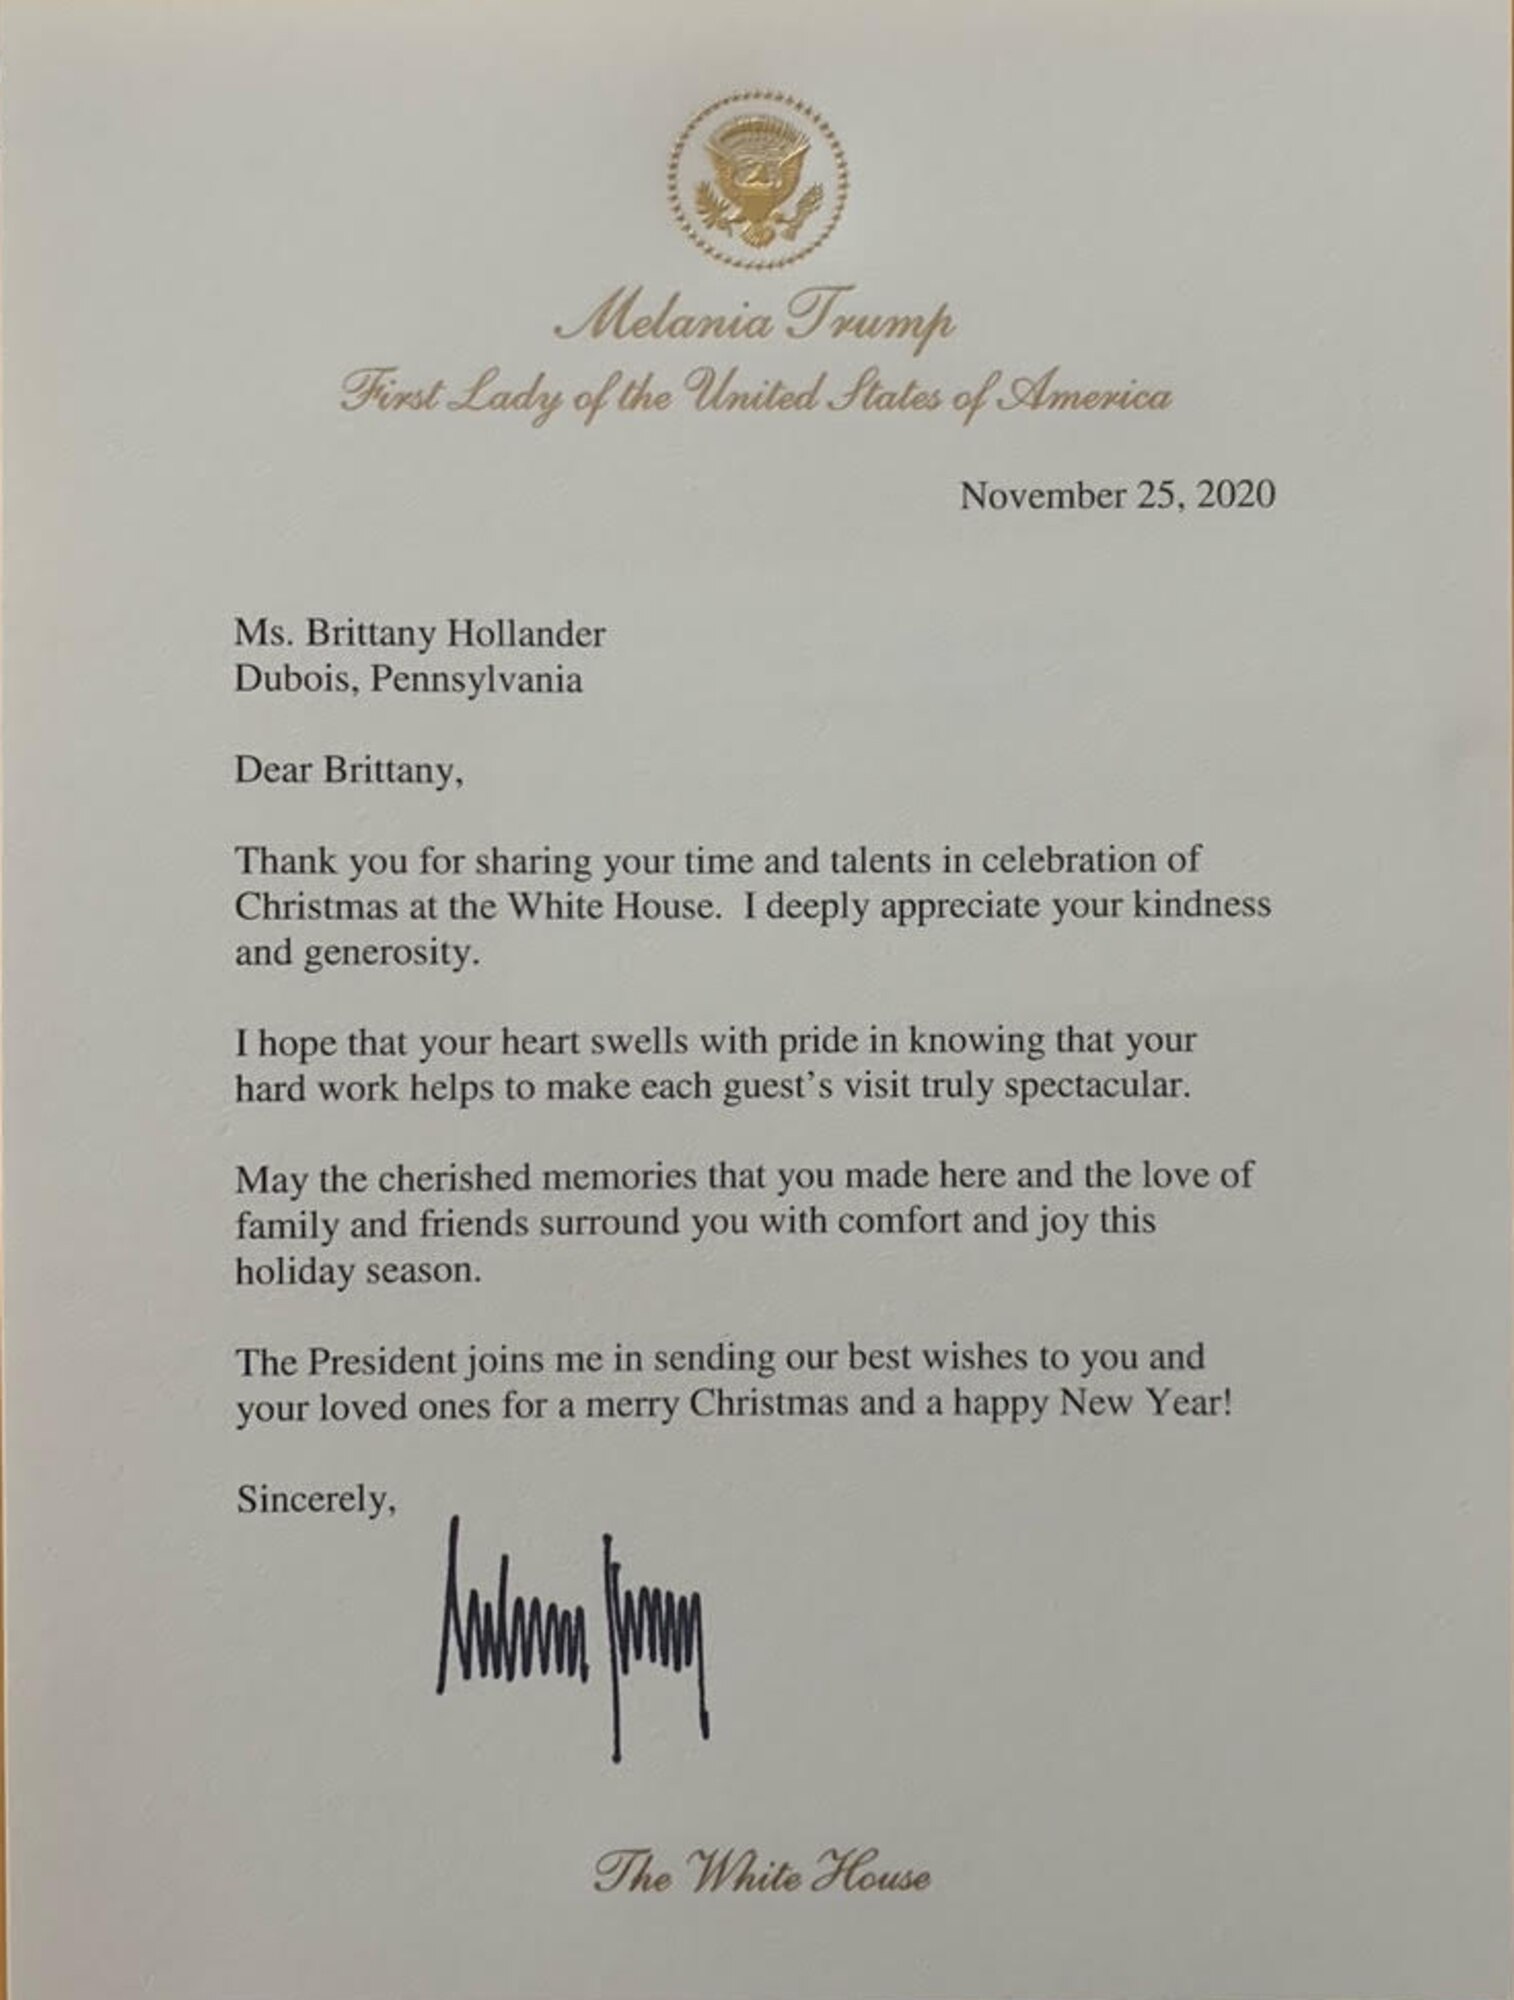 Melania Trump, the first lady, sent a thank you letter to Brittany Hollander for volunteering to help with the White House Christmas decorating project.